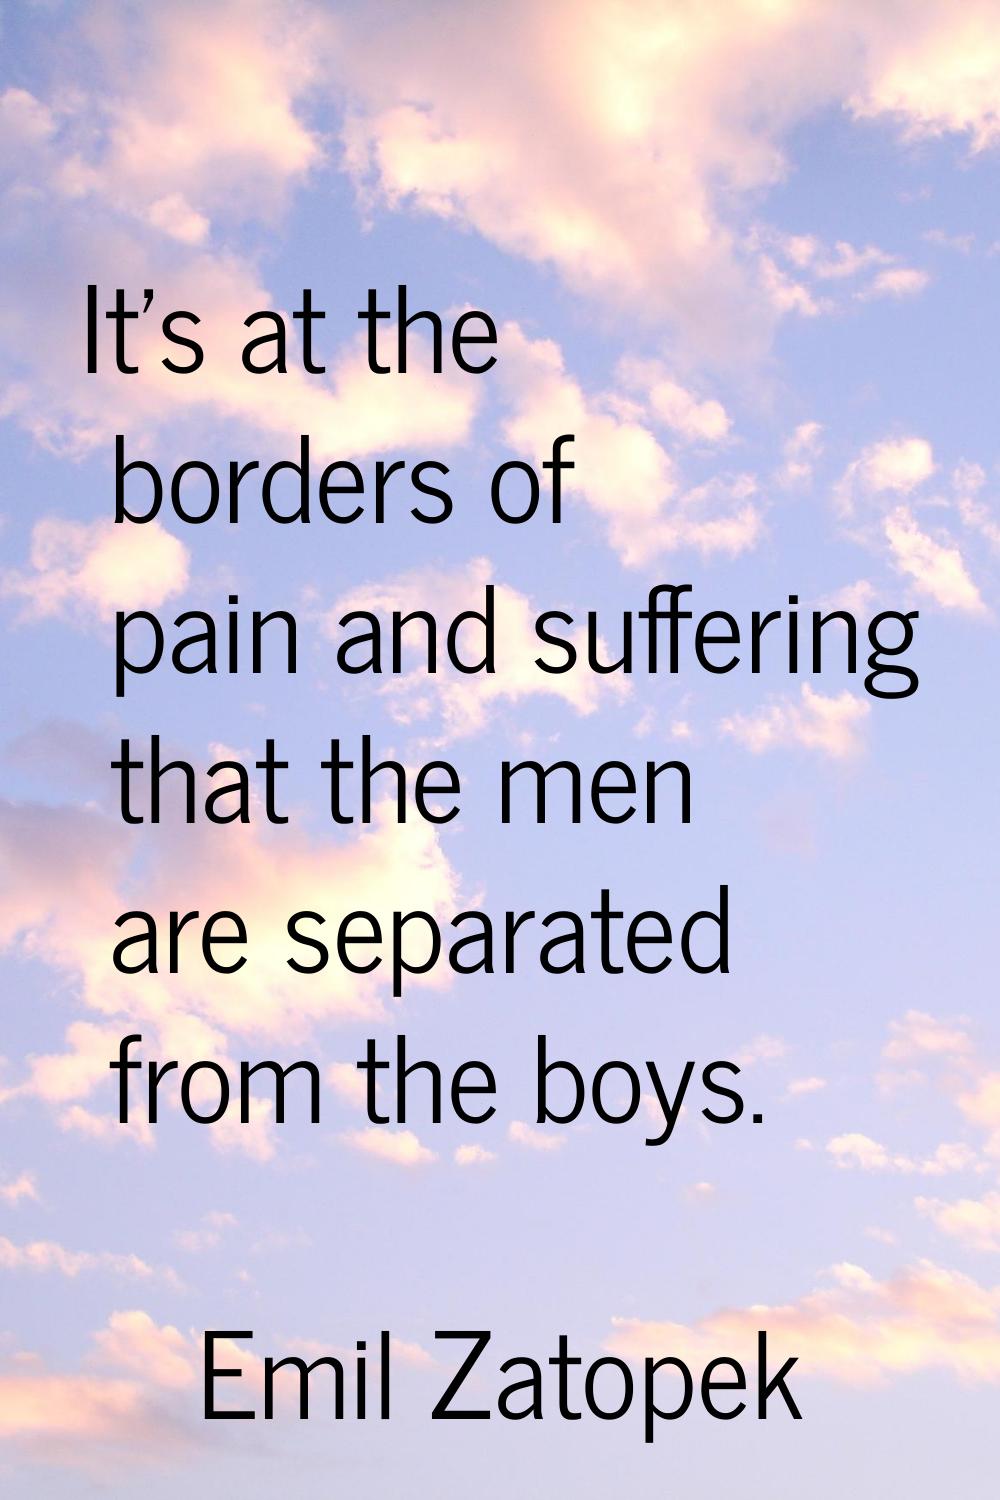 It's at the borders of pain and suffering that the men are separated from the boys.